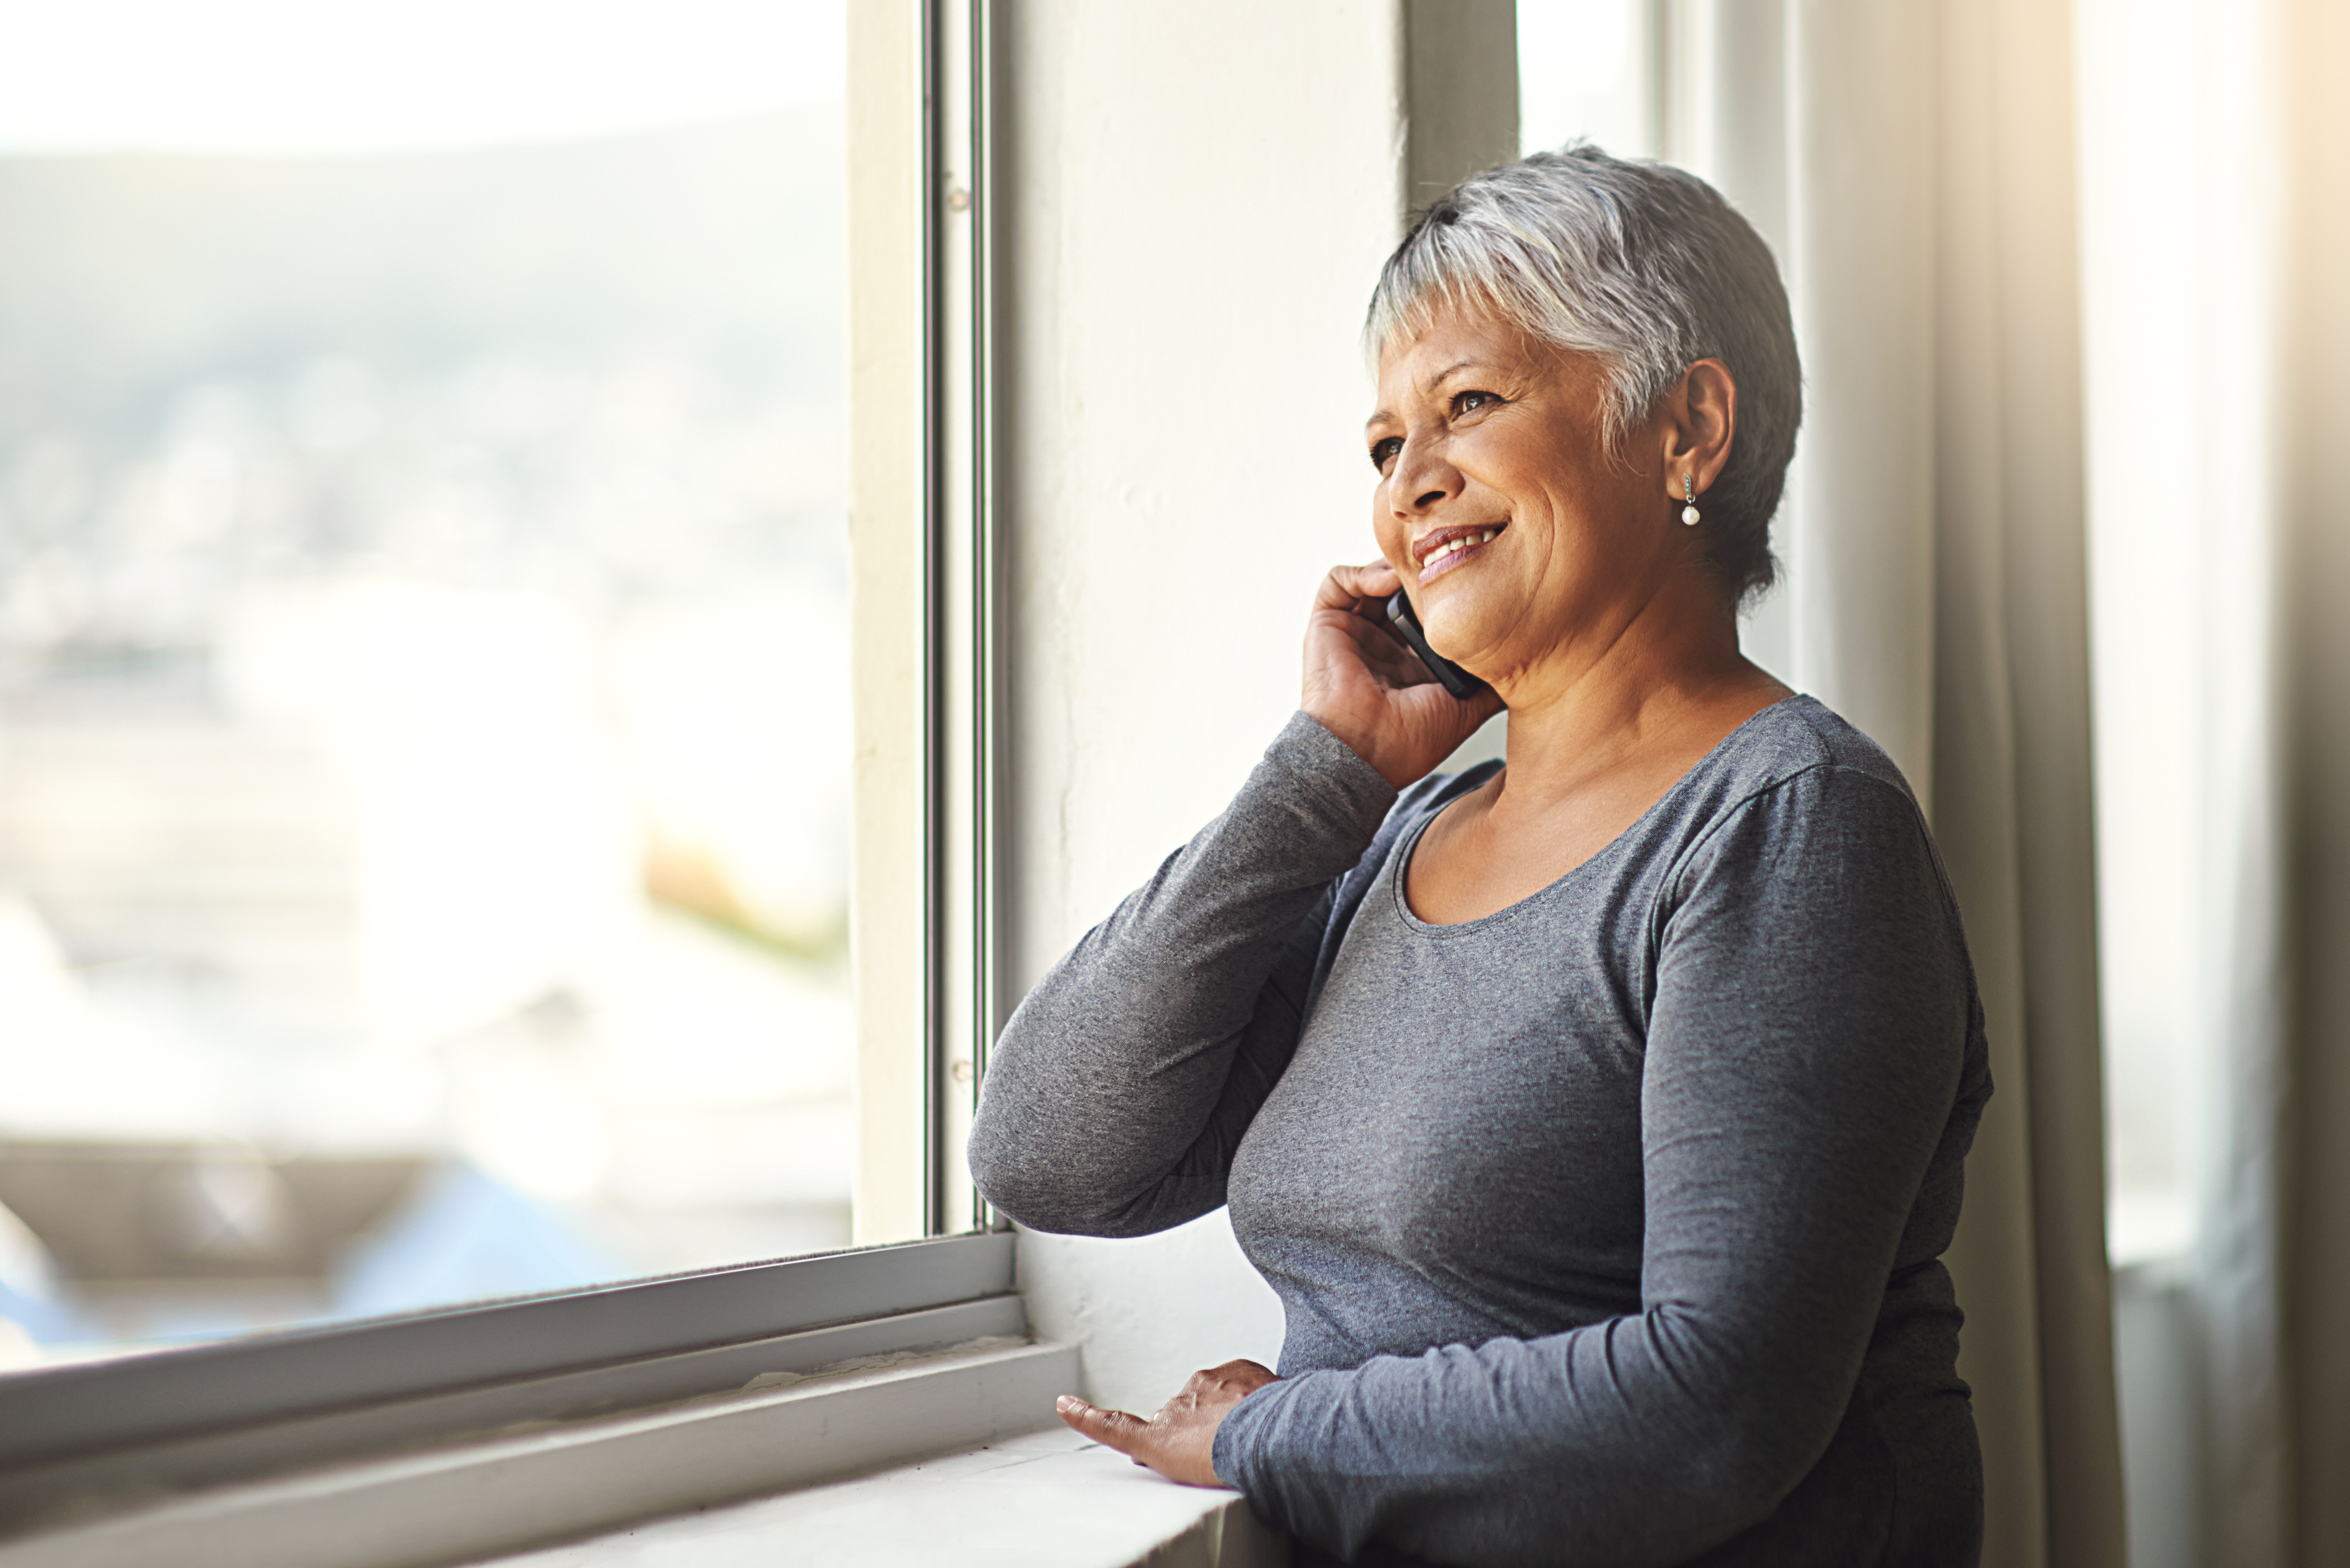 An older woman with short gray hair smiles while talking on a phone, standing by a window